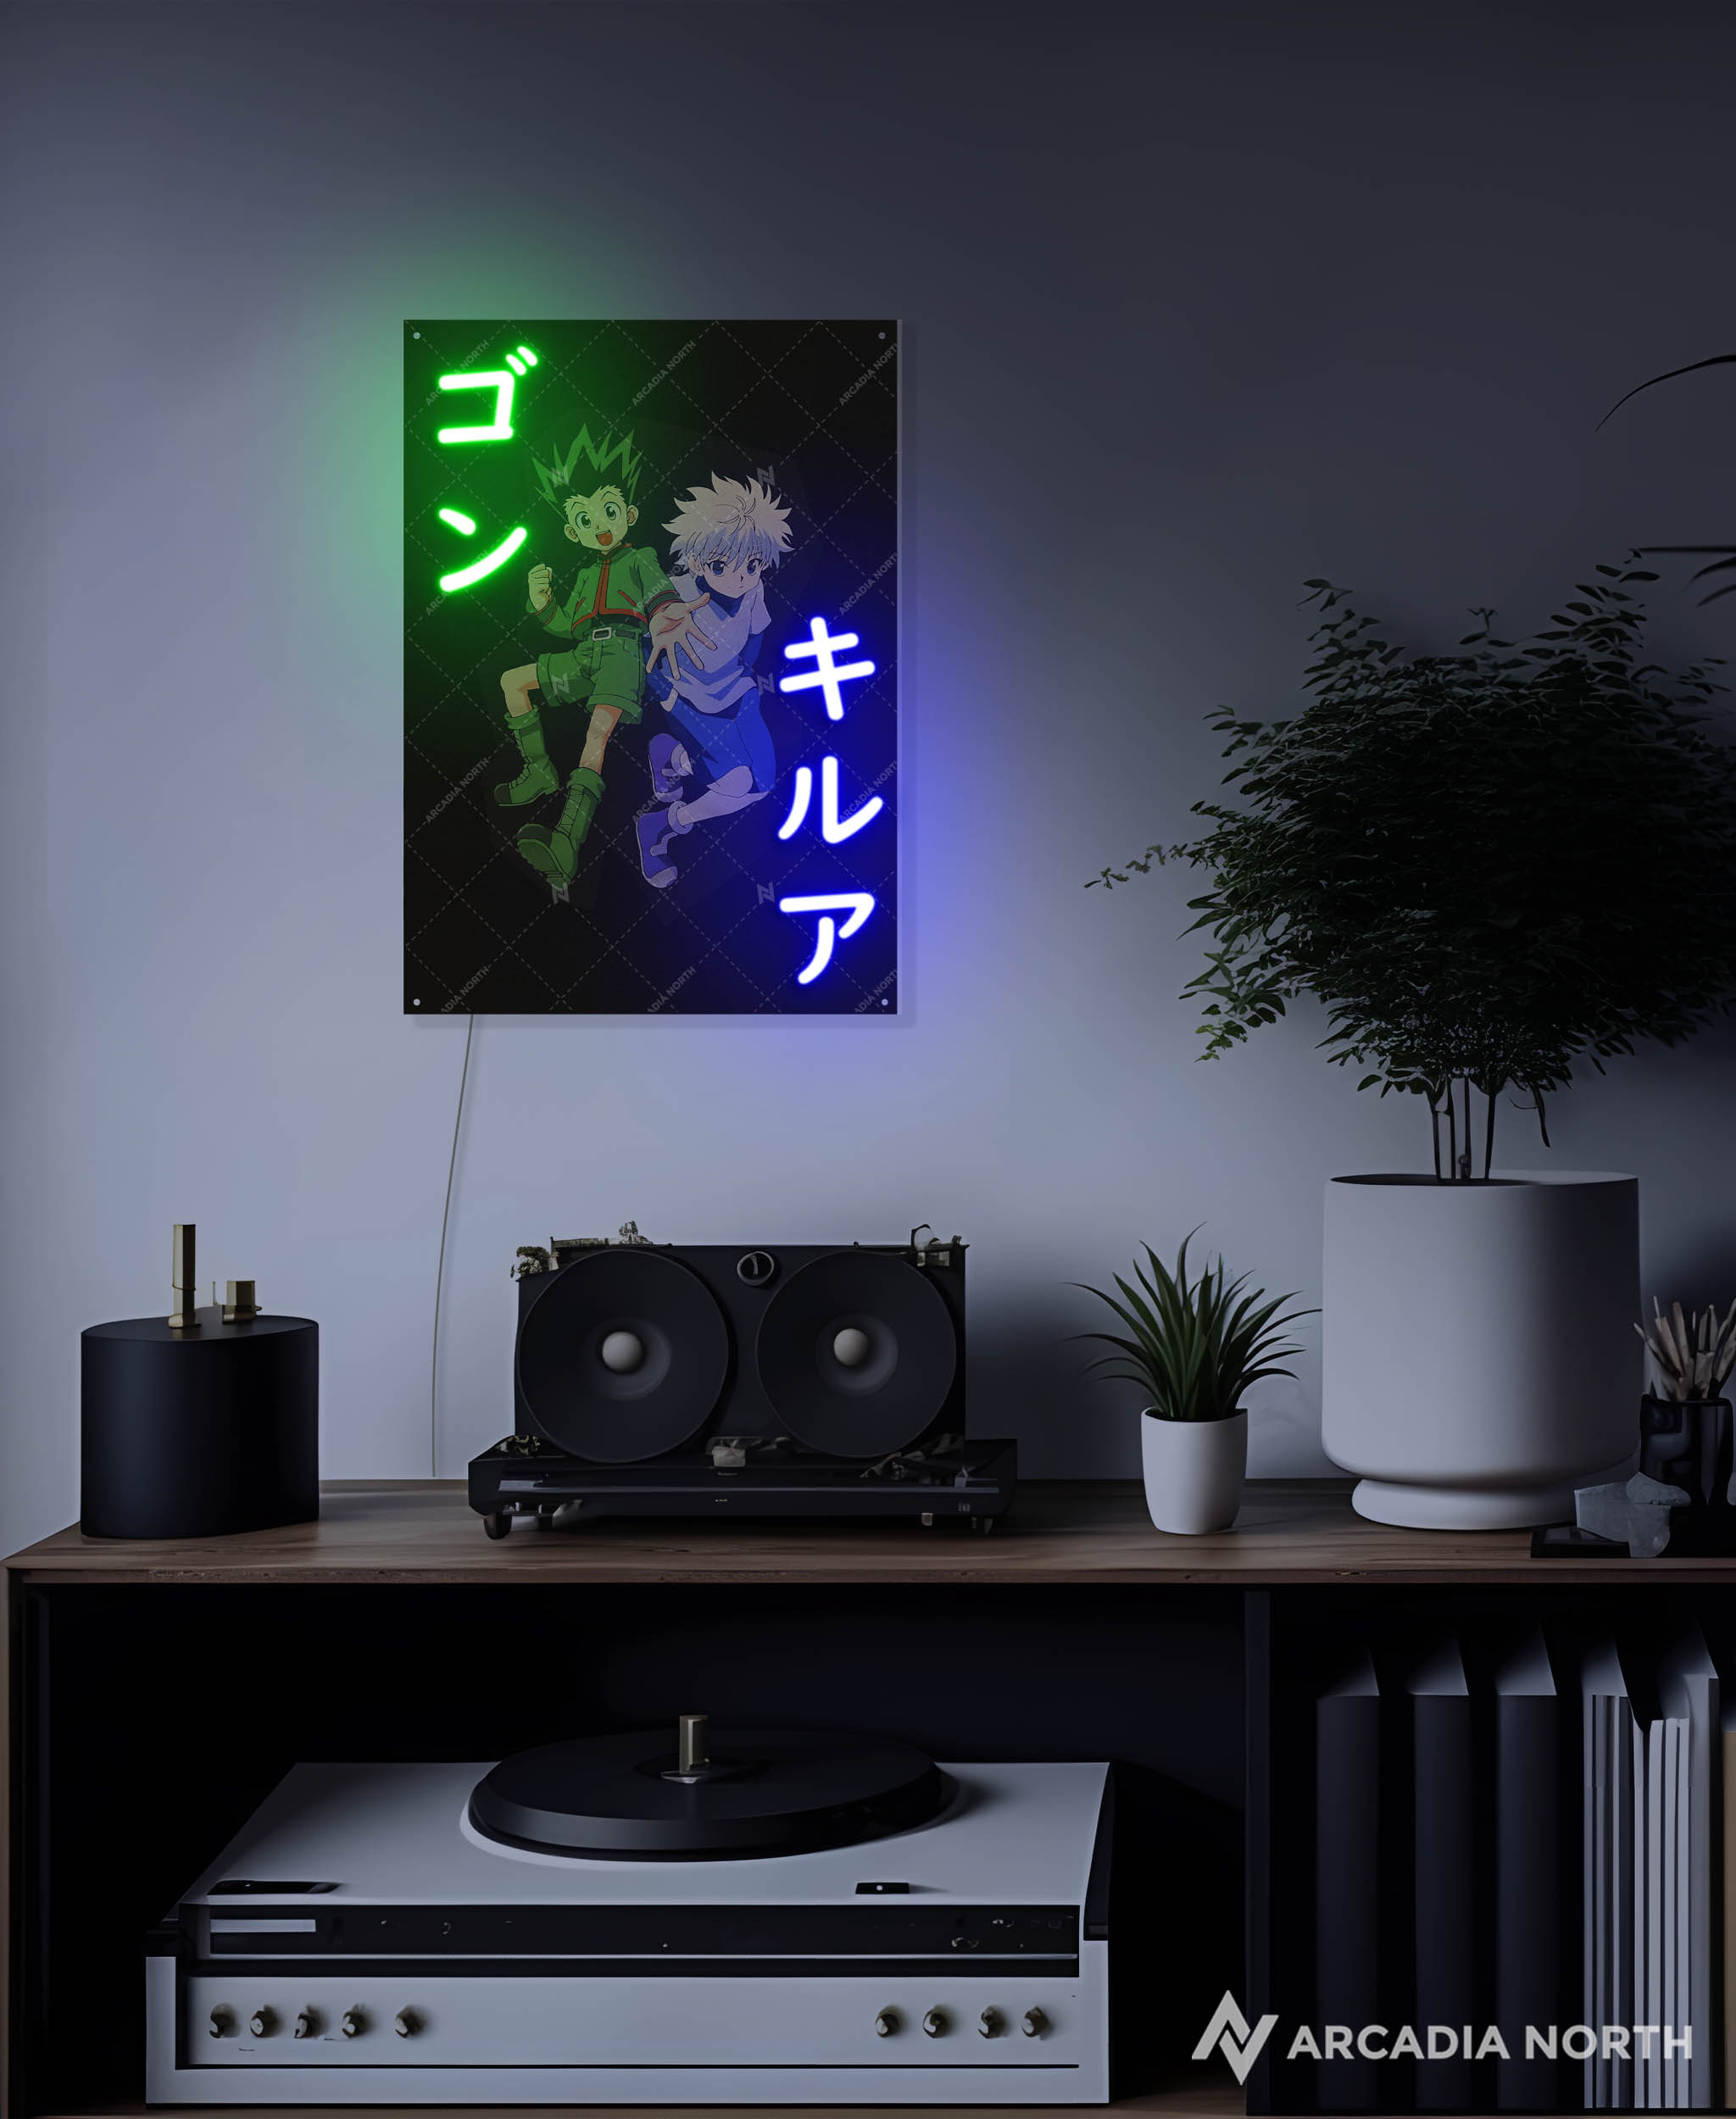 Arcadia North AURALIGHT - an LED Poster featuring the anime Hunter x Hunter with Gon and Killua and their names written in Japanese Katakana [ゴン] and [キルア]. The names are illuminated by glowing LED neon lights that match each character’s main color. UV-printed poster on acrylic.